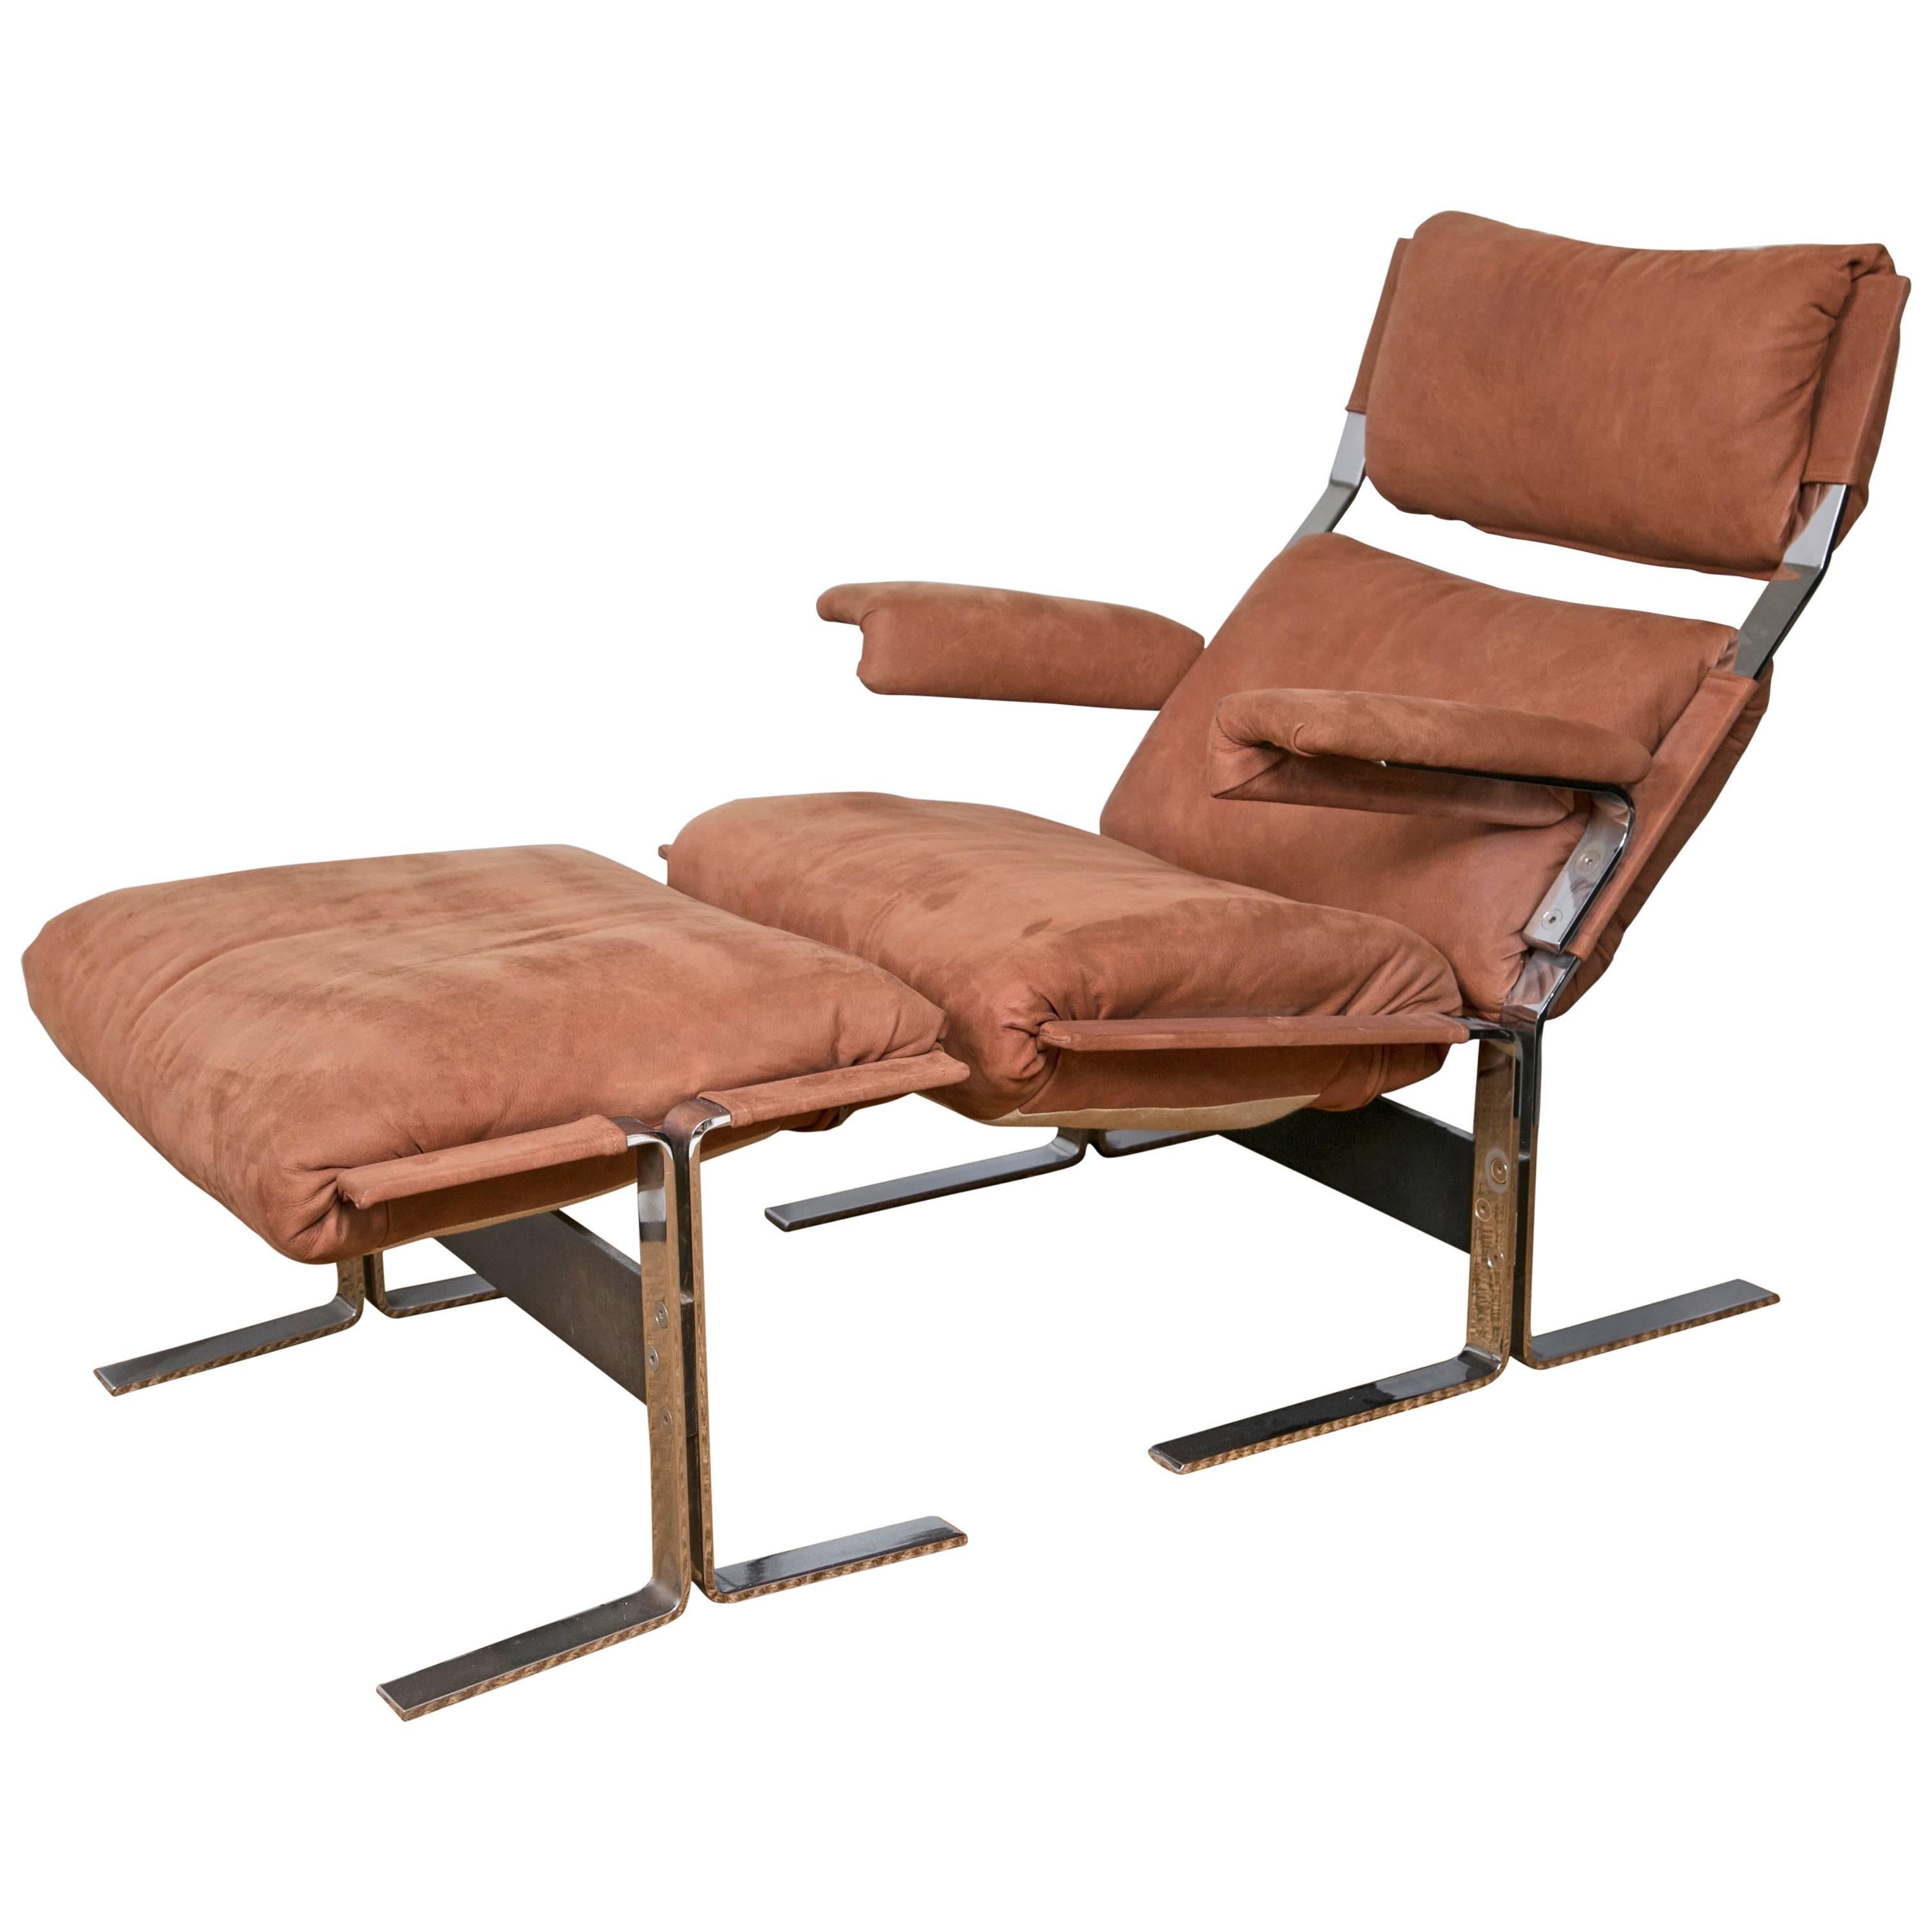  Richard Hersberger for Pace Lounge Chair & Ottoman